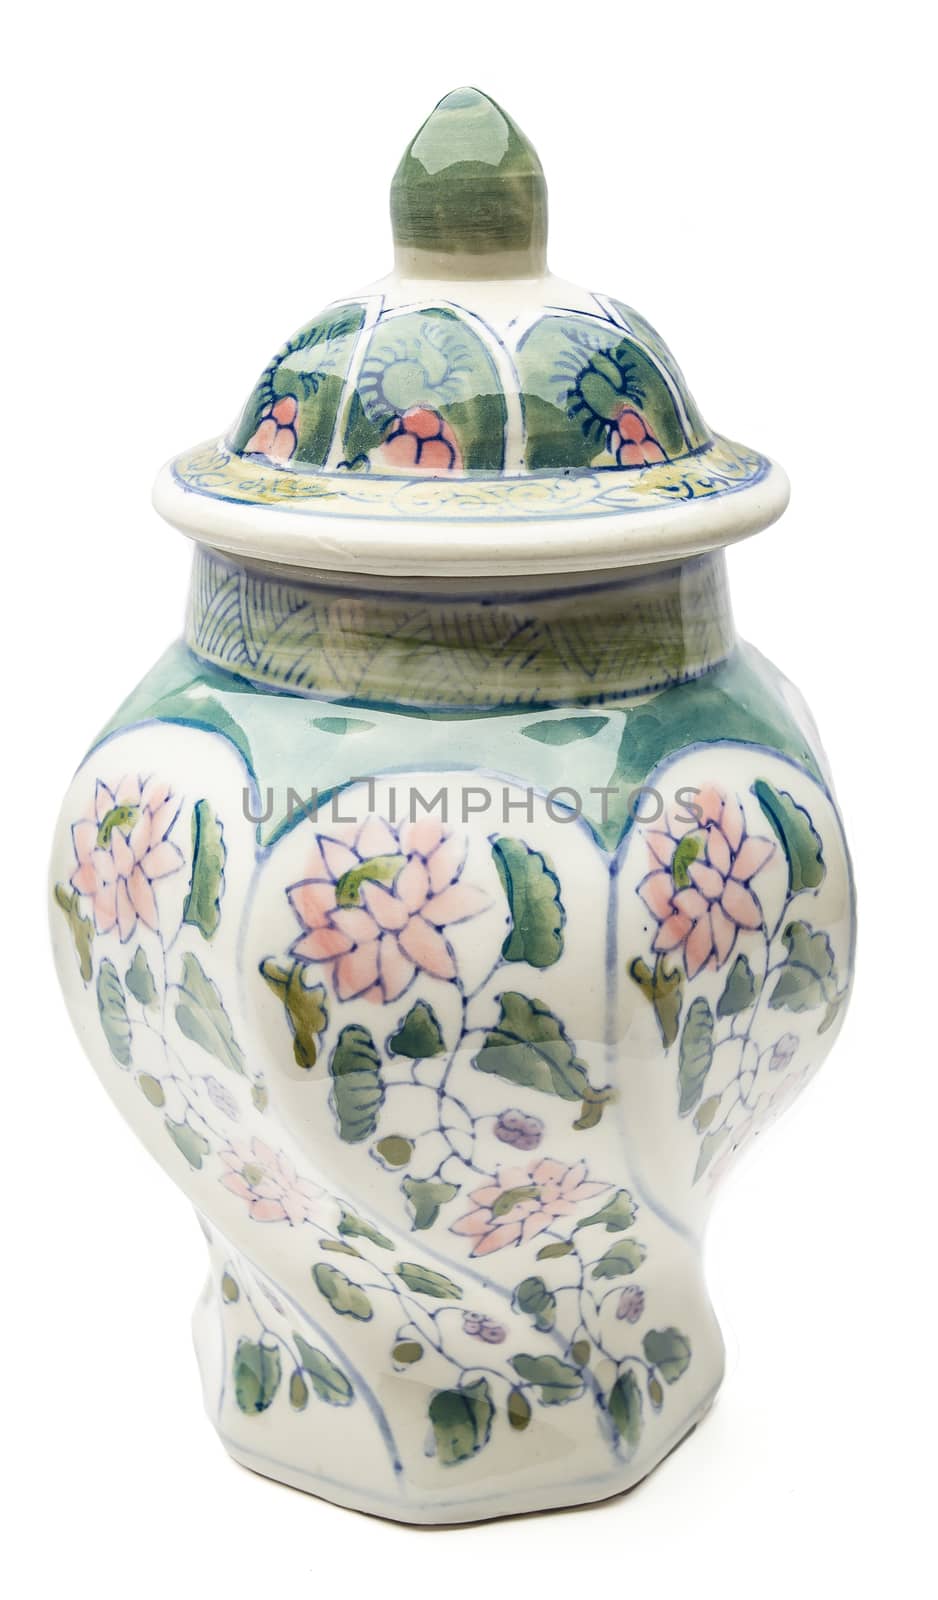 Small flowered pattern pot use to keep kitchen ingredient safe